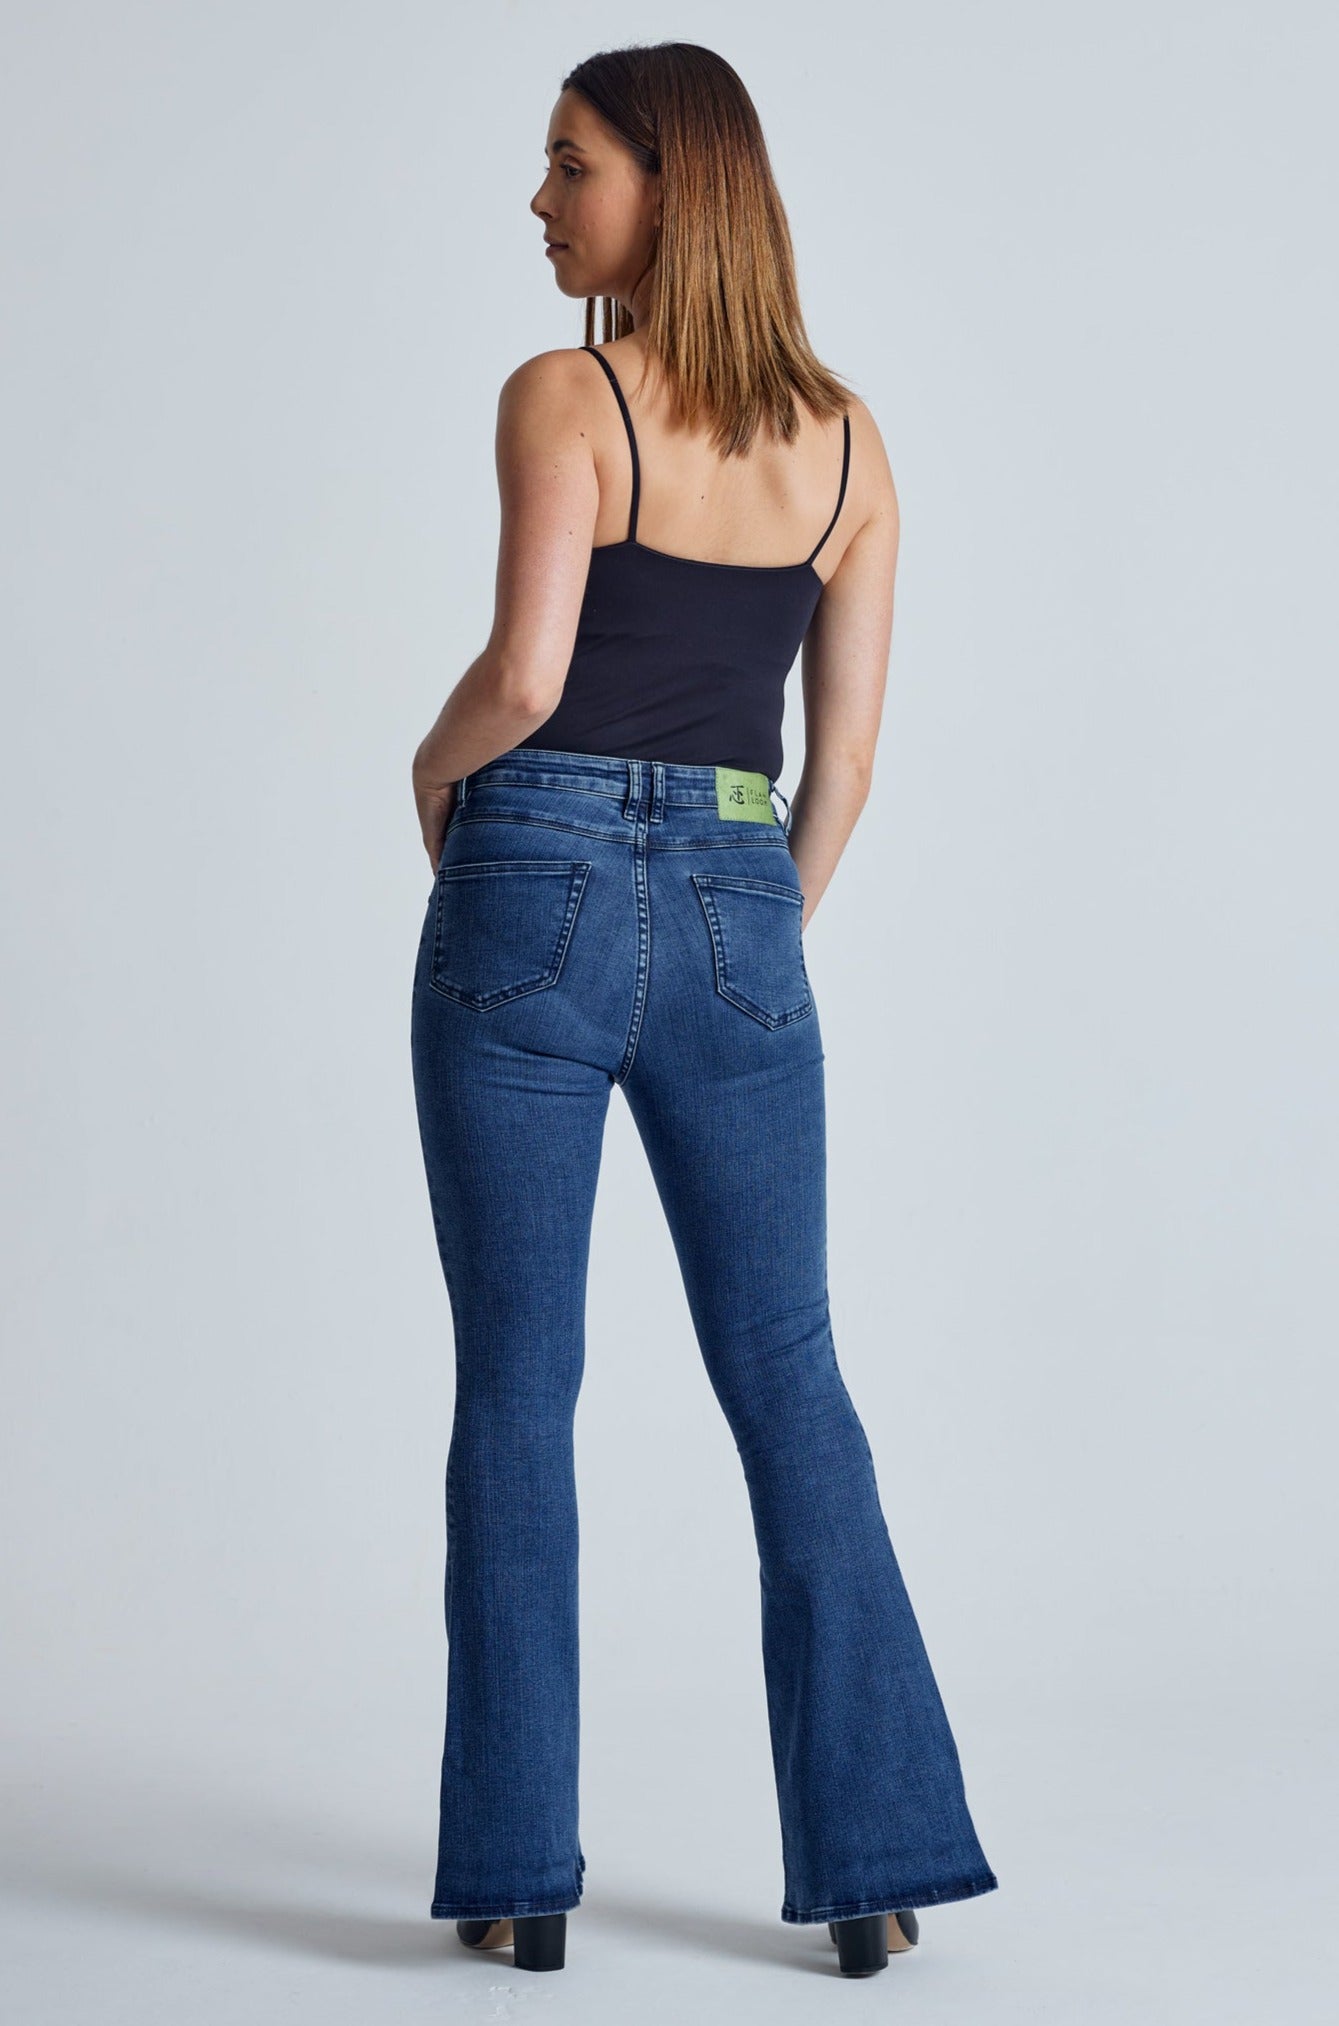 Azure Mavis High Waisted Skinny Flared Jeans - GOTS Certified Organic Cotton and Recycled Polyester